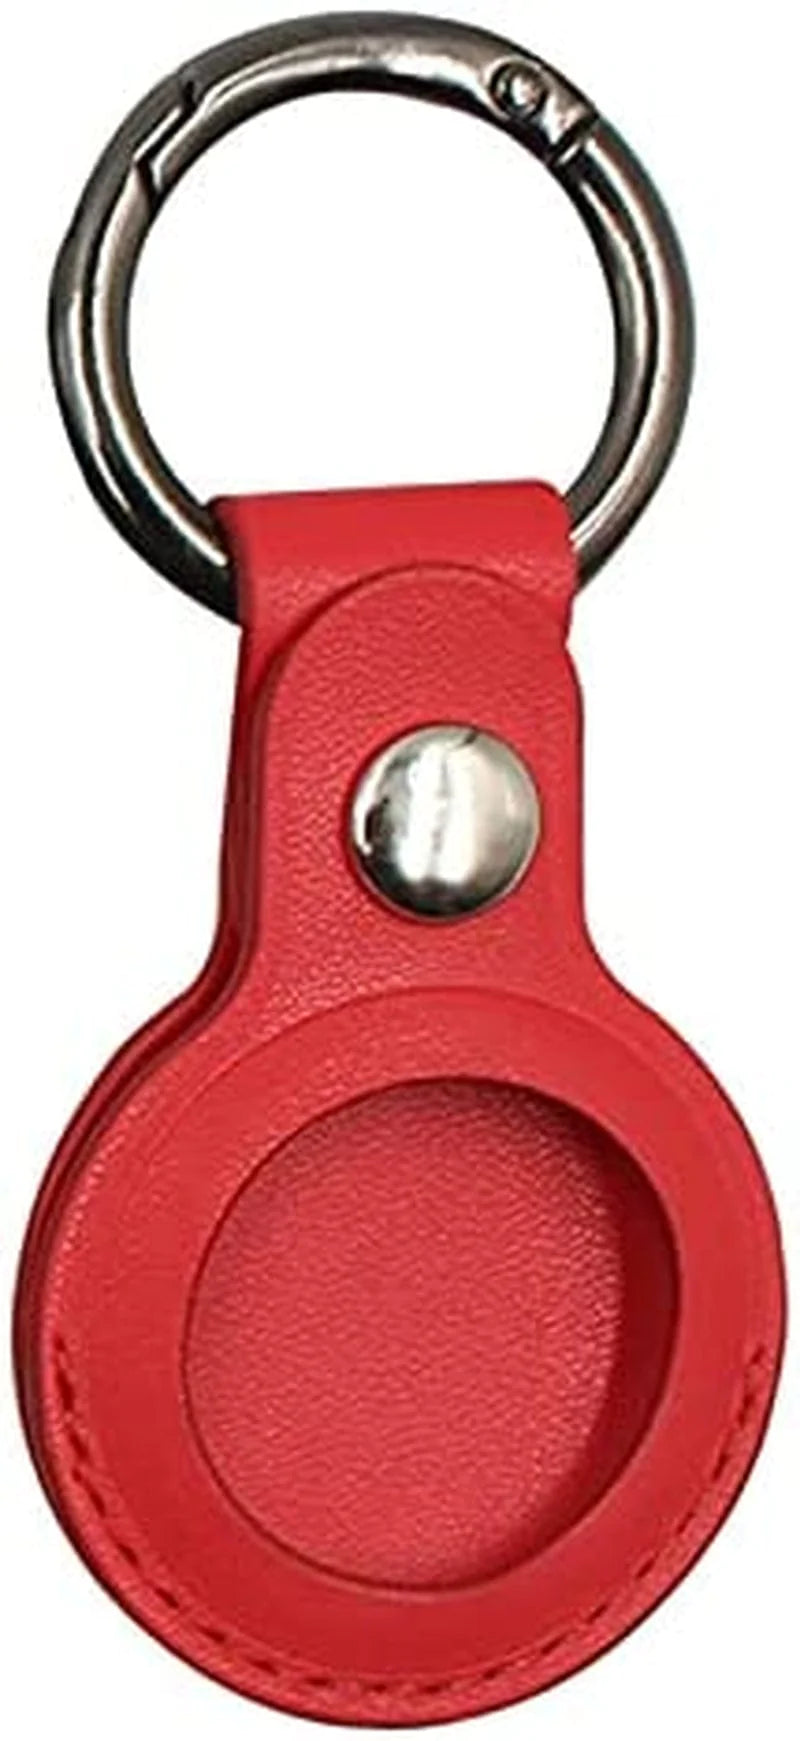  Leather Keychain Case Holder Compatible with Apple